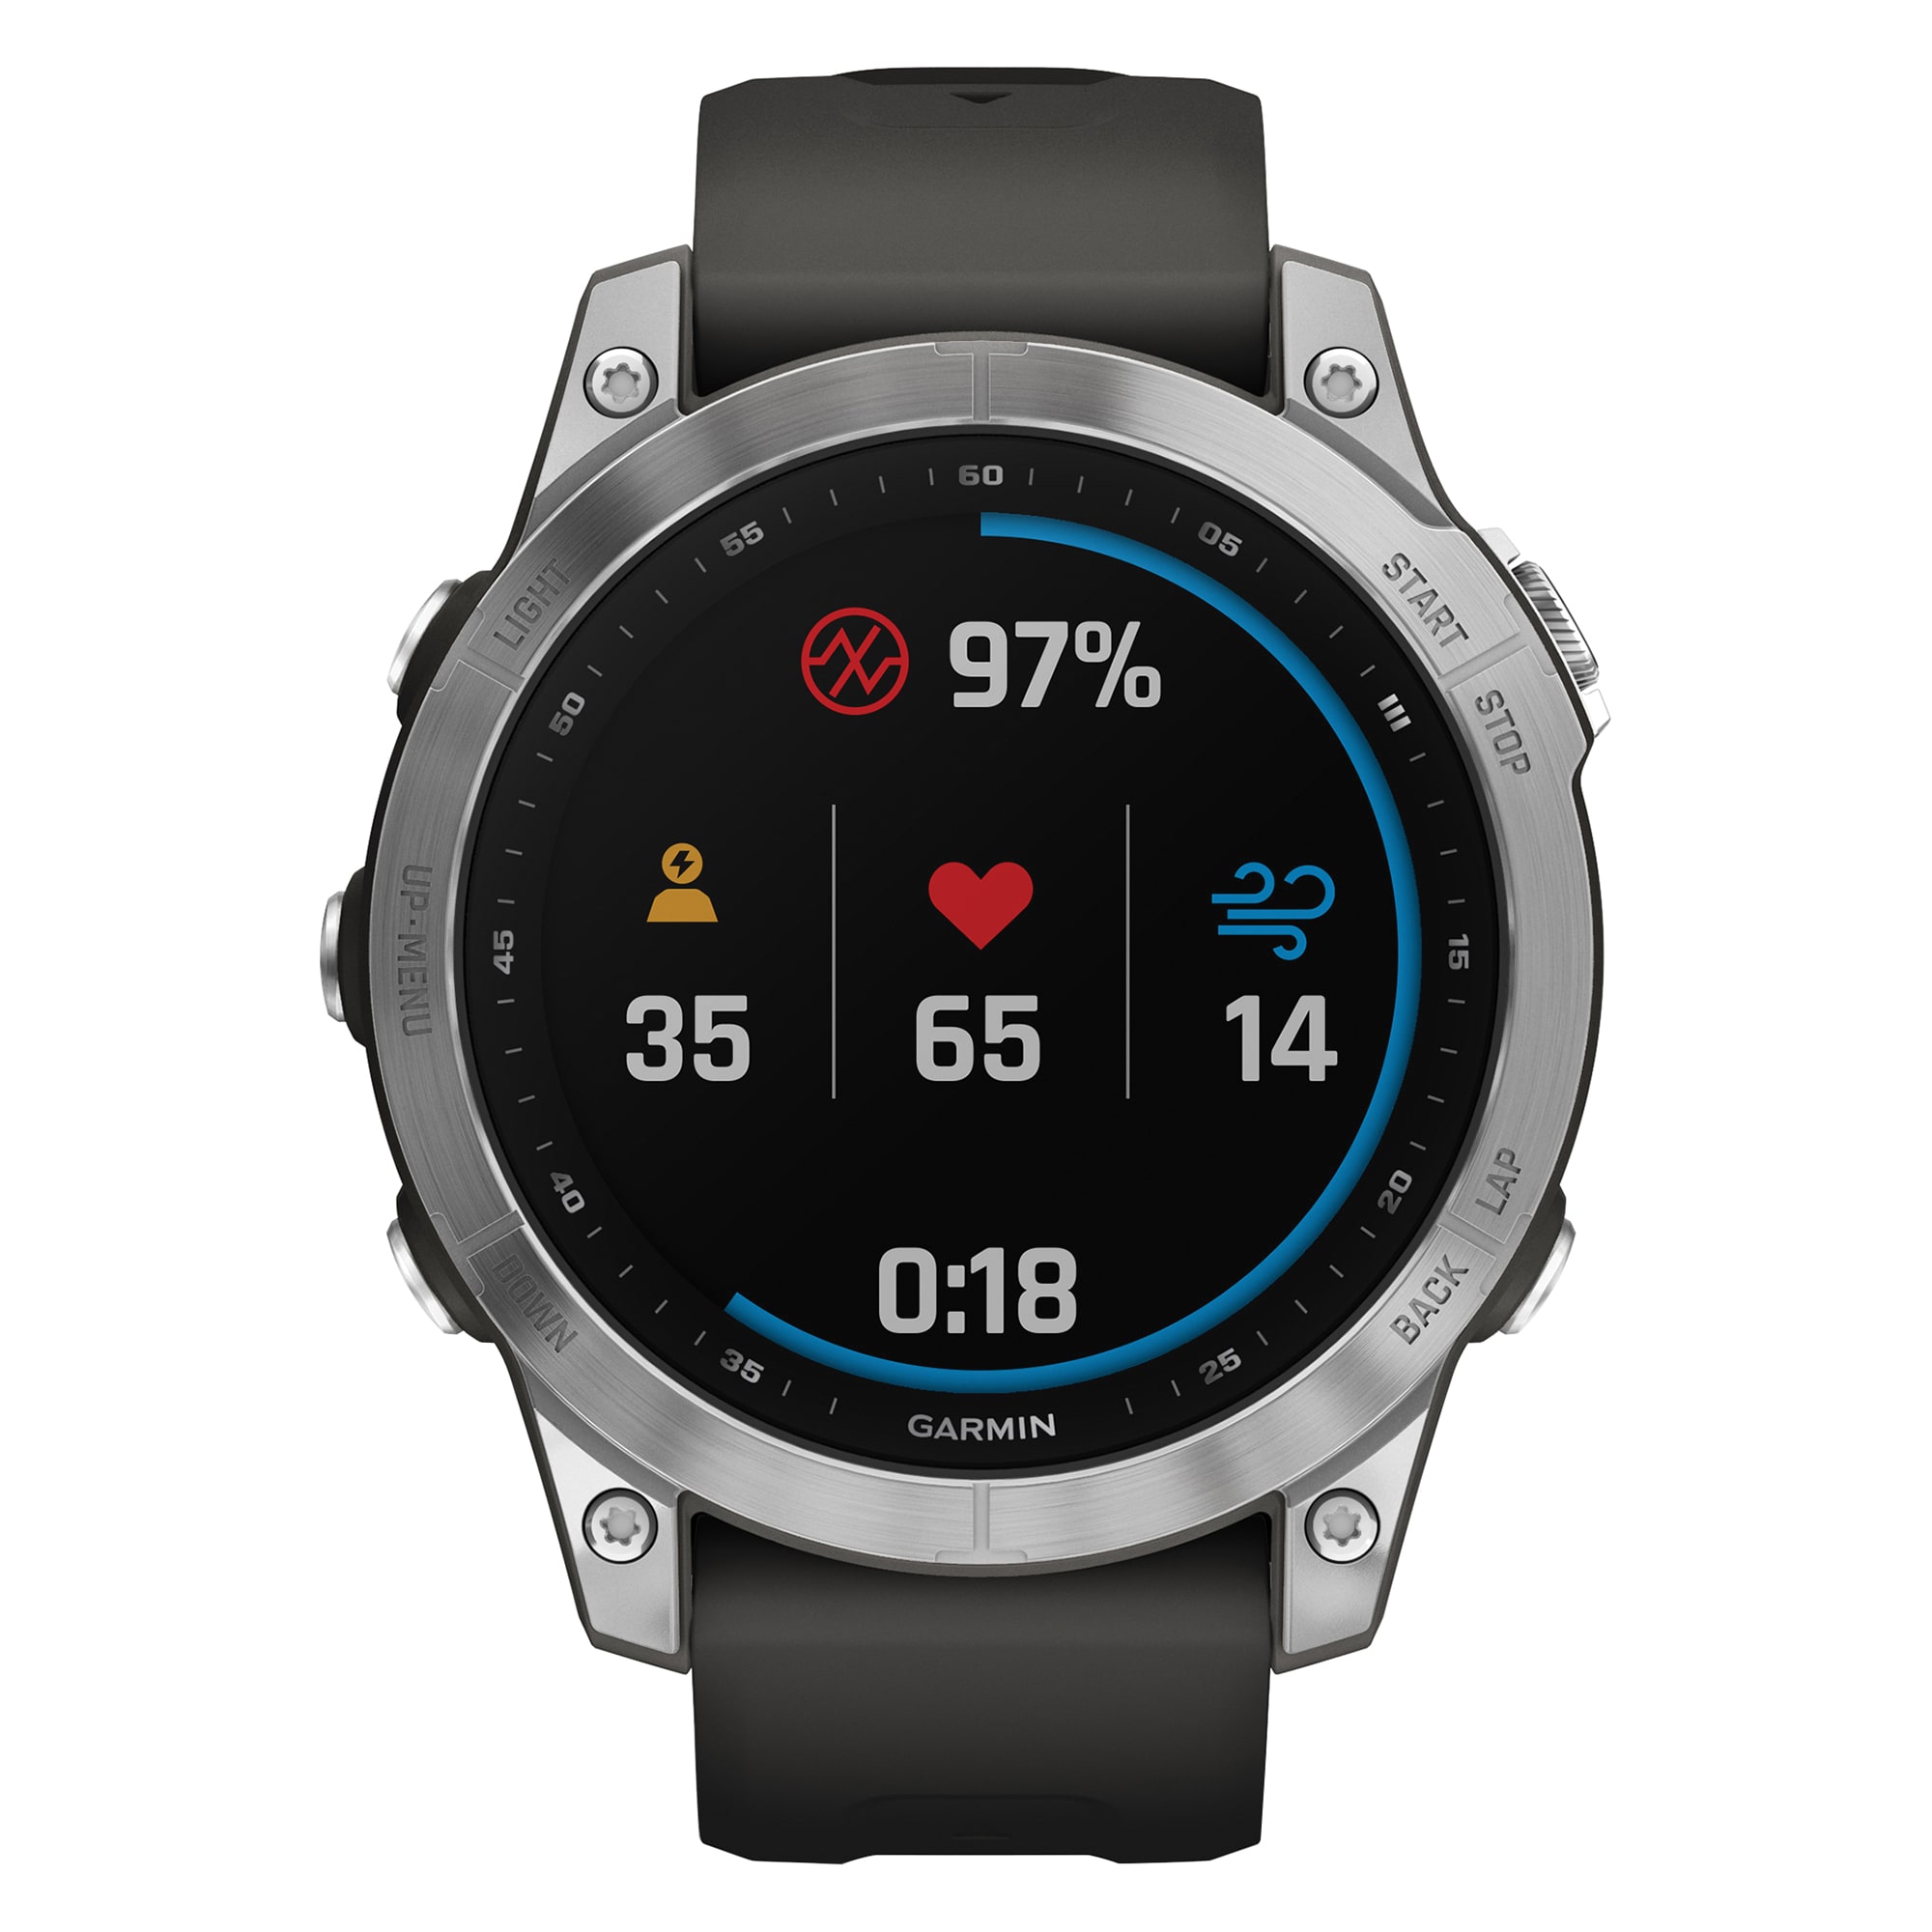 Enabled fenix Trackers in and Rate at Step Gps Fitness 7 with Watch Counter, Heart Monitor Garmin the Smart department